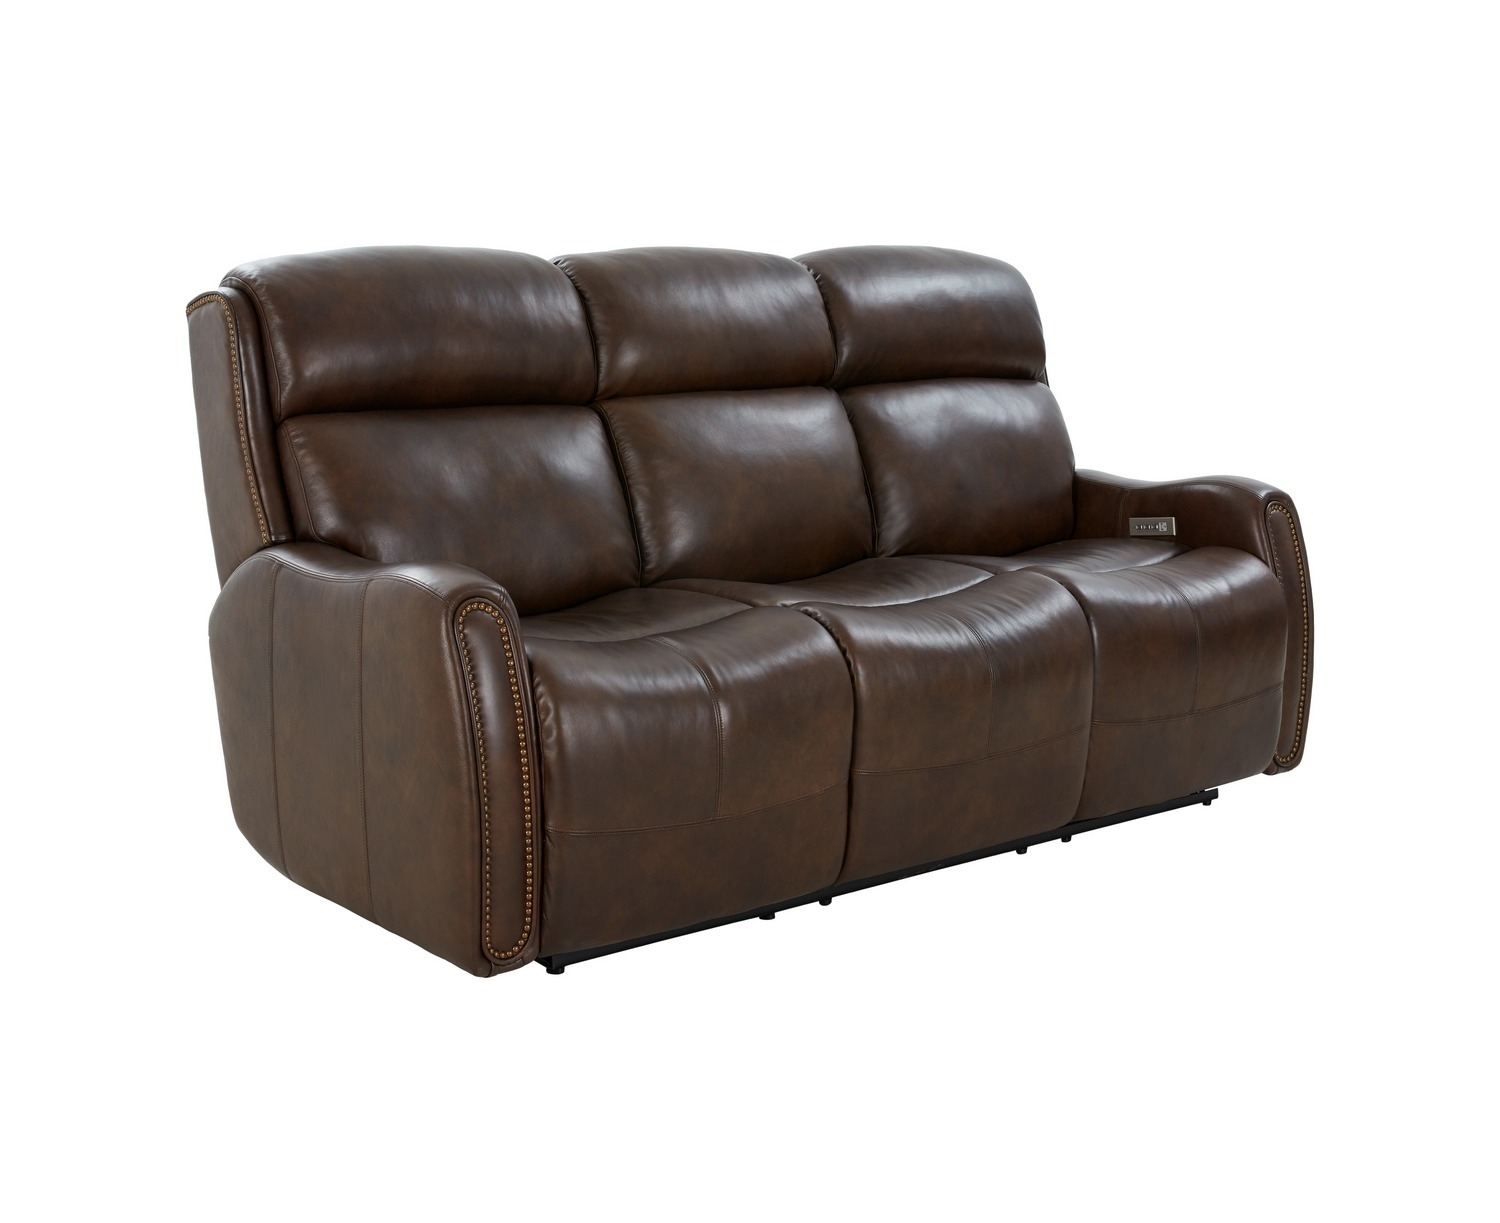 Barcalounger Brookside Power Reclining Sofa with Power Head Rests and Power Lumbar - Ashford Walnut/All Leather